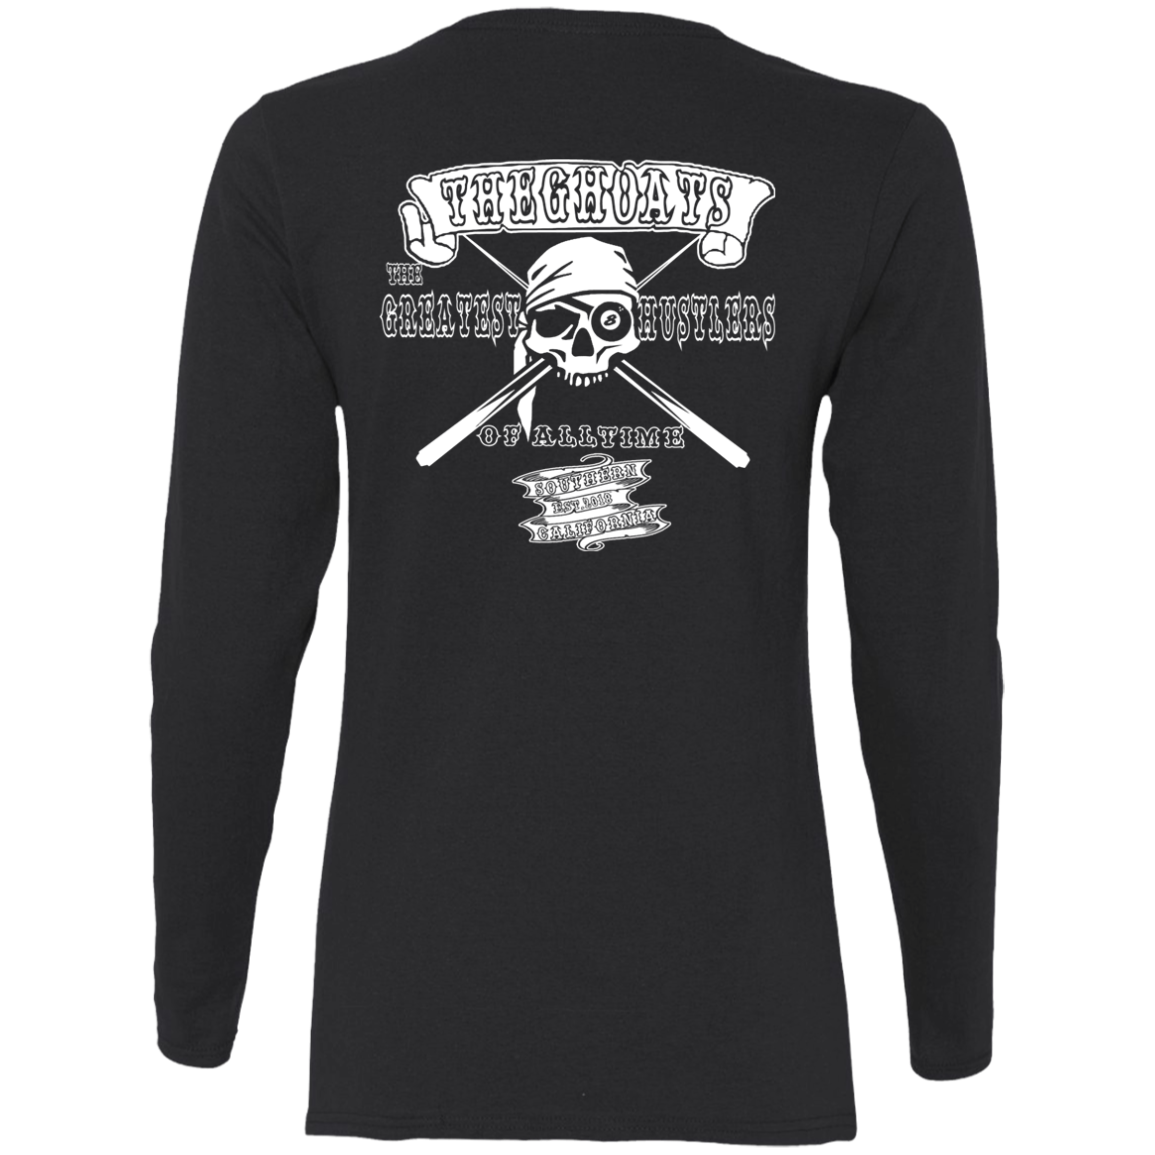 The GHOATS Custom Design. #4 Motorcycle Club Style. Ver 2/2. Ladies' Cotton LS T-Shirt